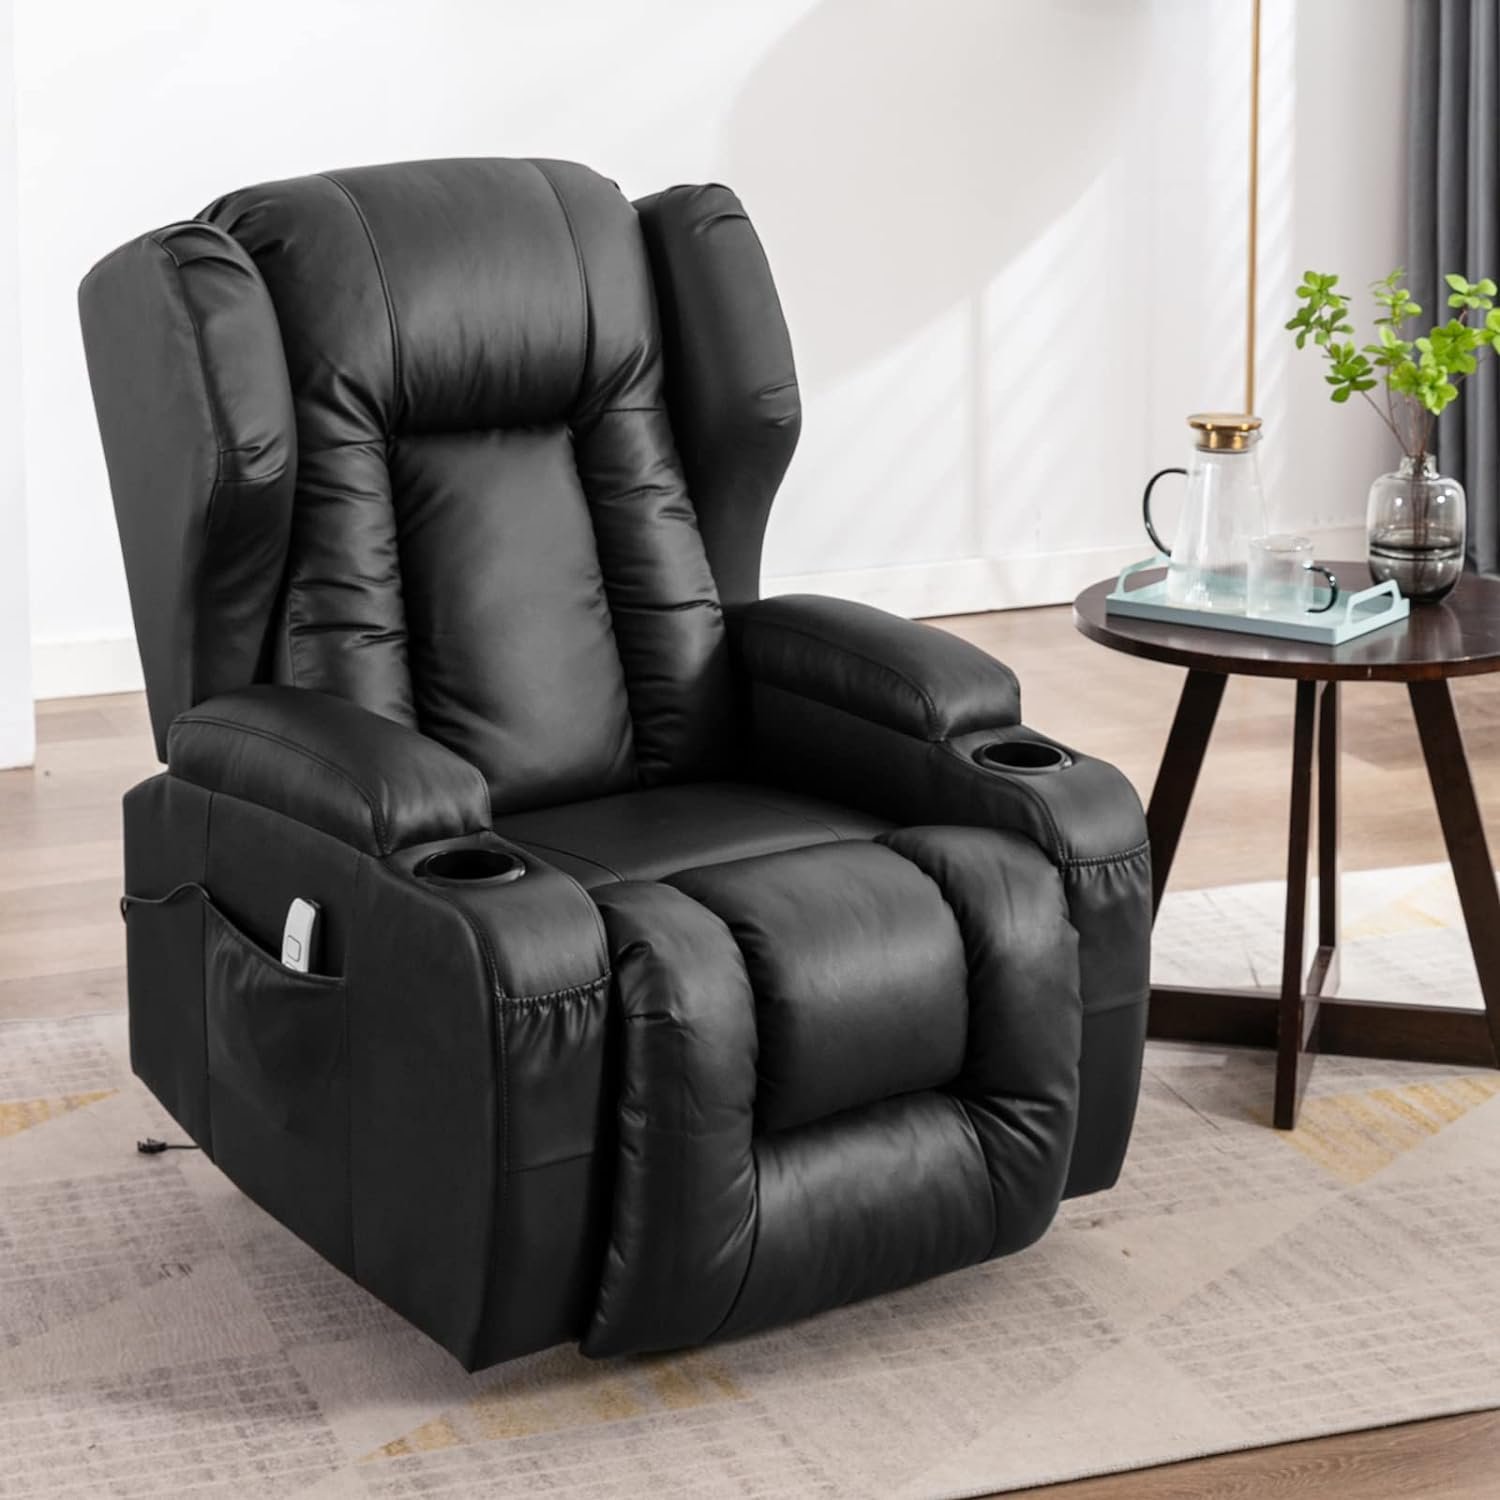 IPKIG Power Recliner Chair Review